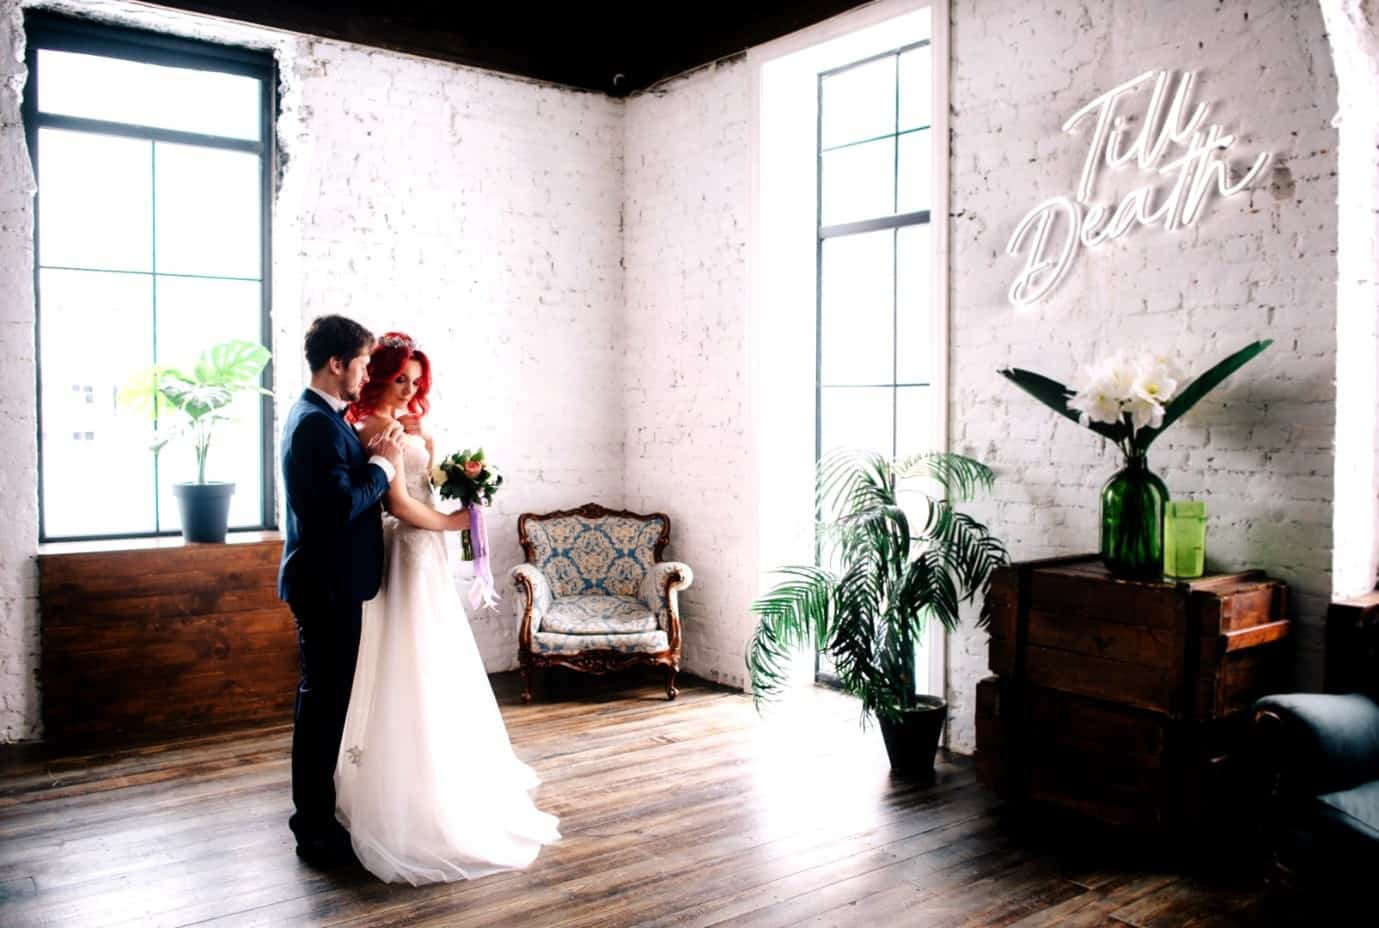 A Married couple stood in a room with a neon sign